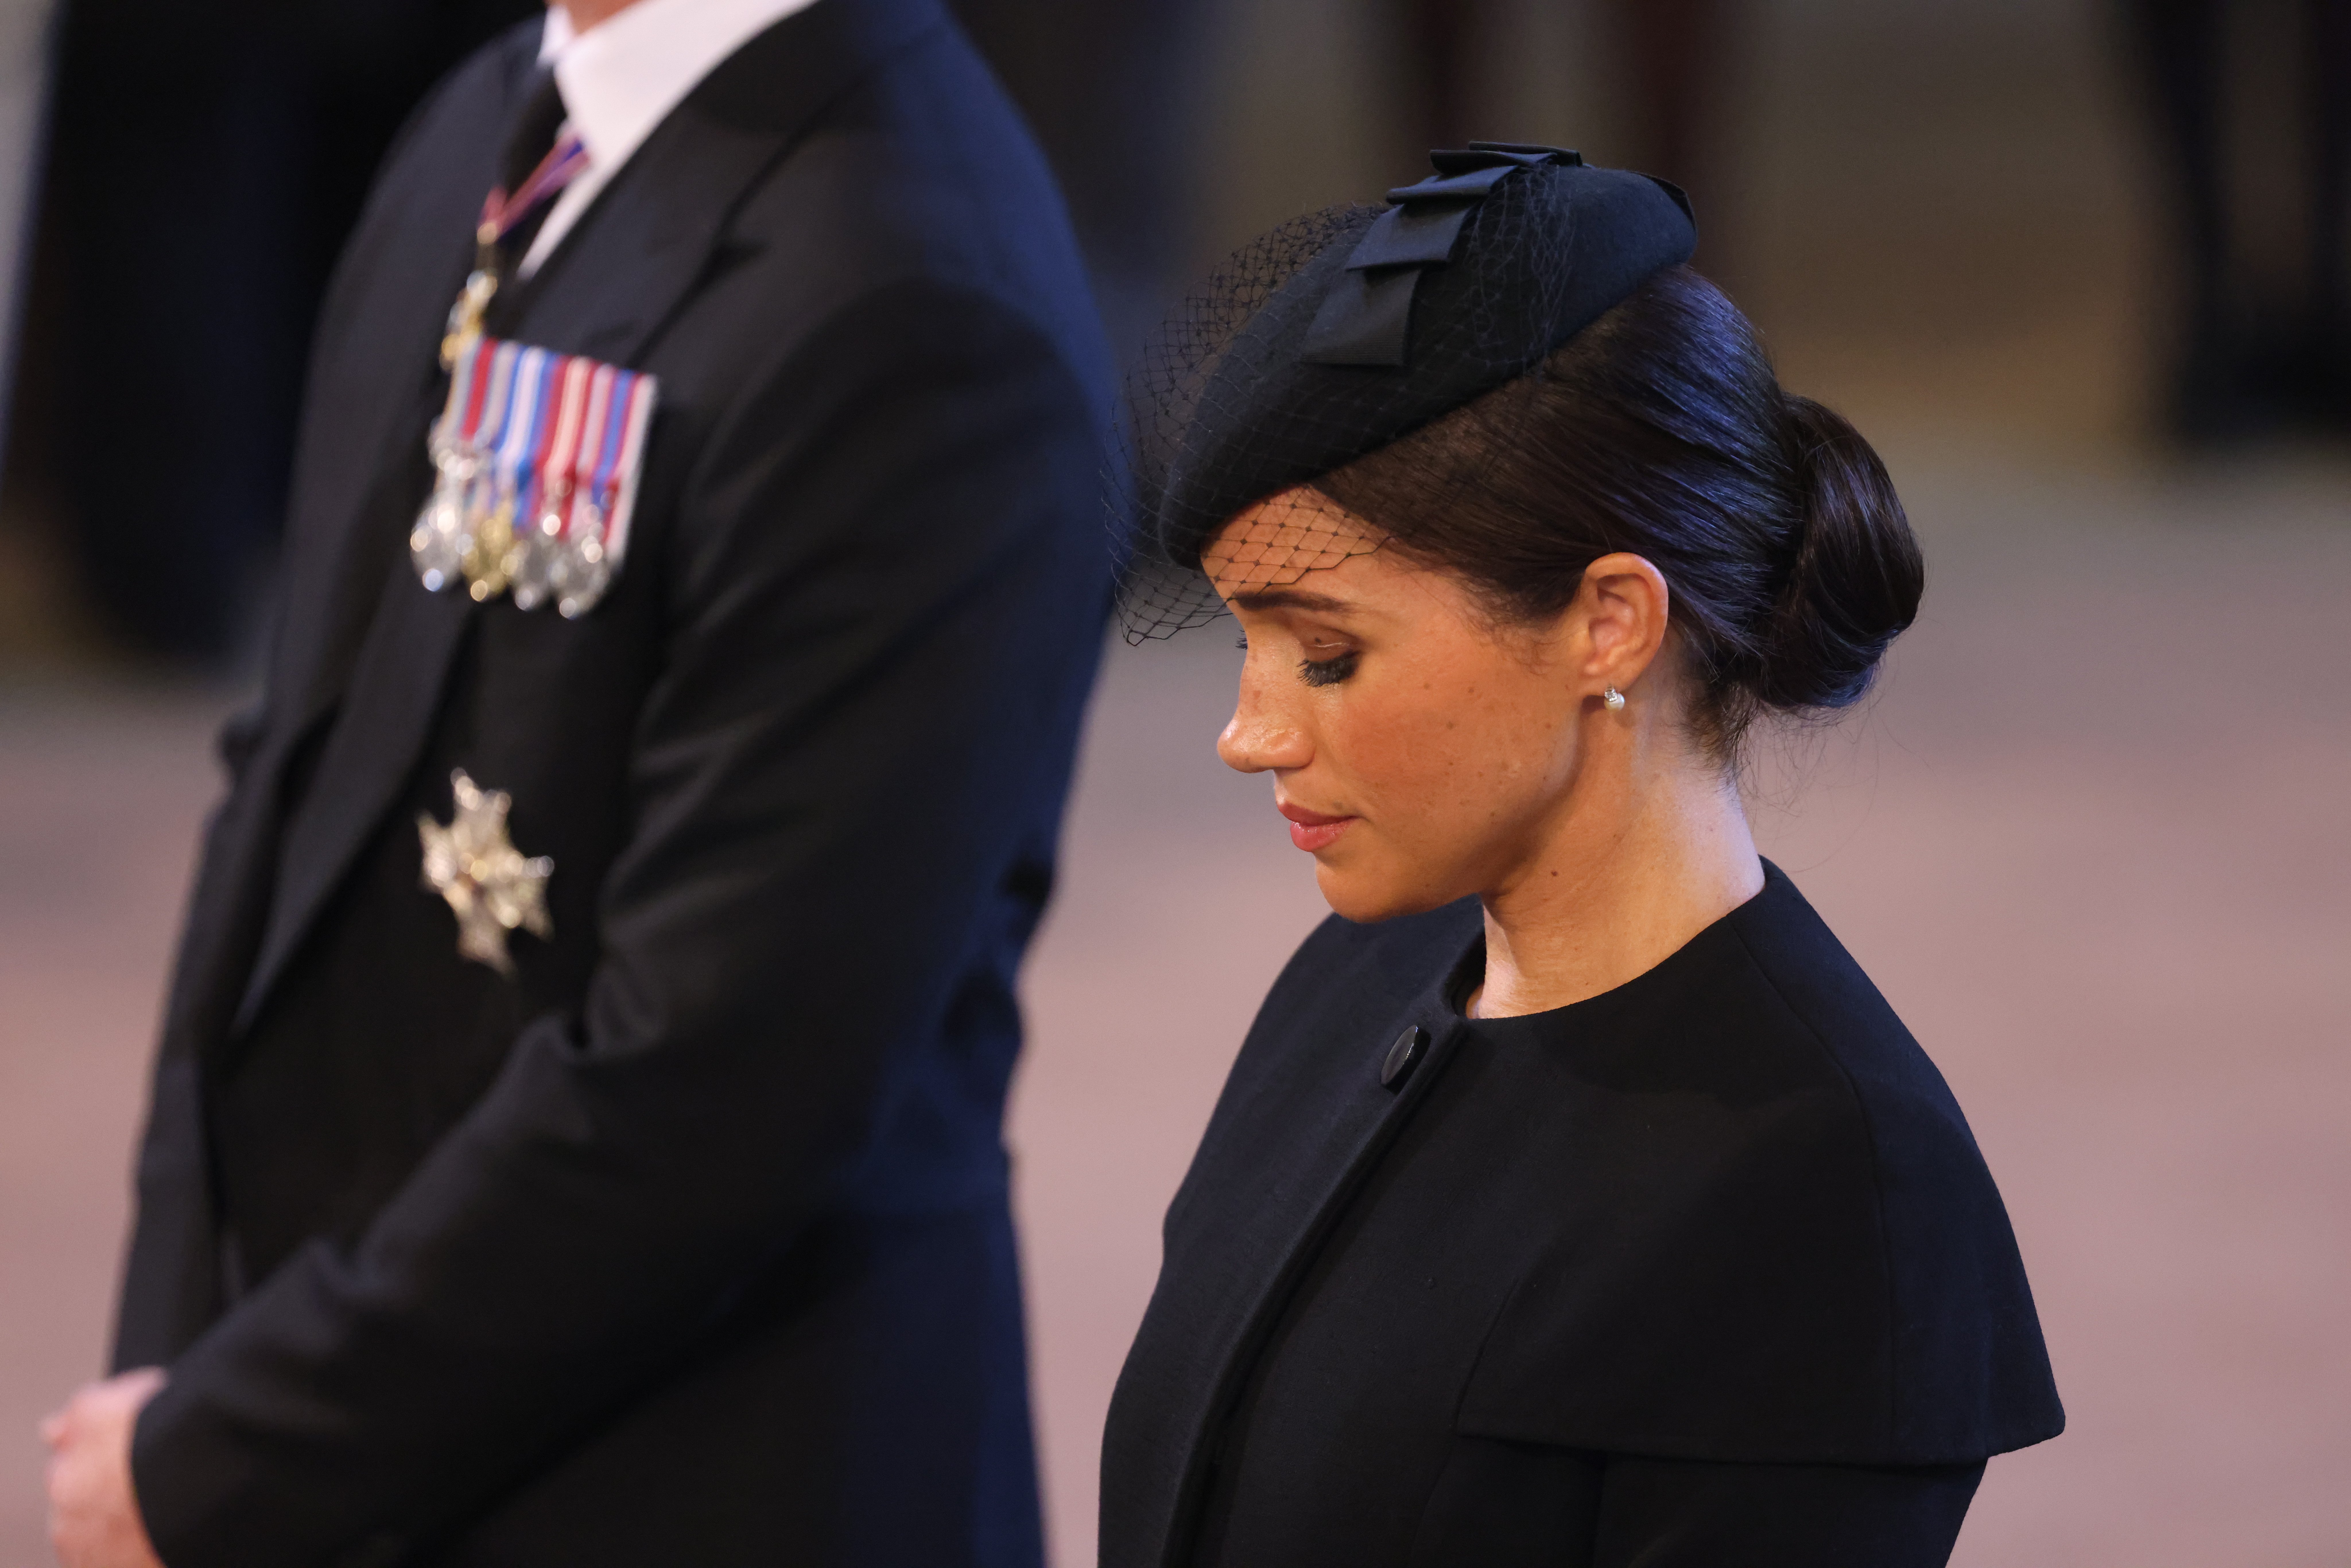 Meghan, Duchess of Sussex looks on as the coffin of Queen Elizabeth II is brought into Westminster Hall on September 14, 2022 in London, United Kingdom. | Source: Getty Images